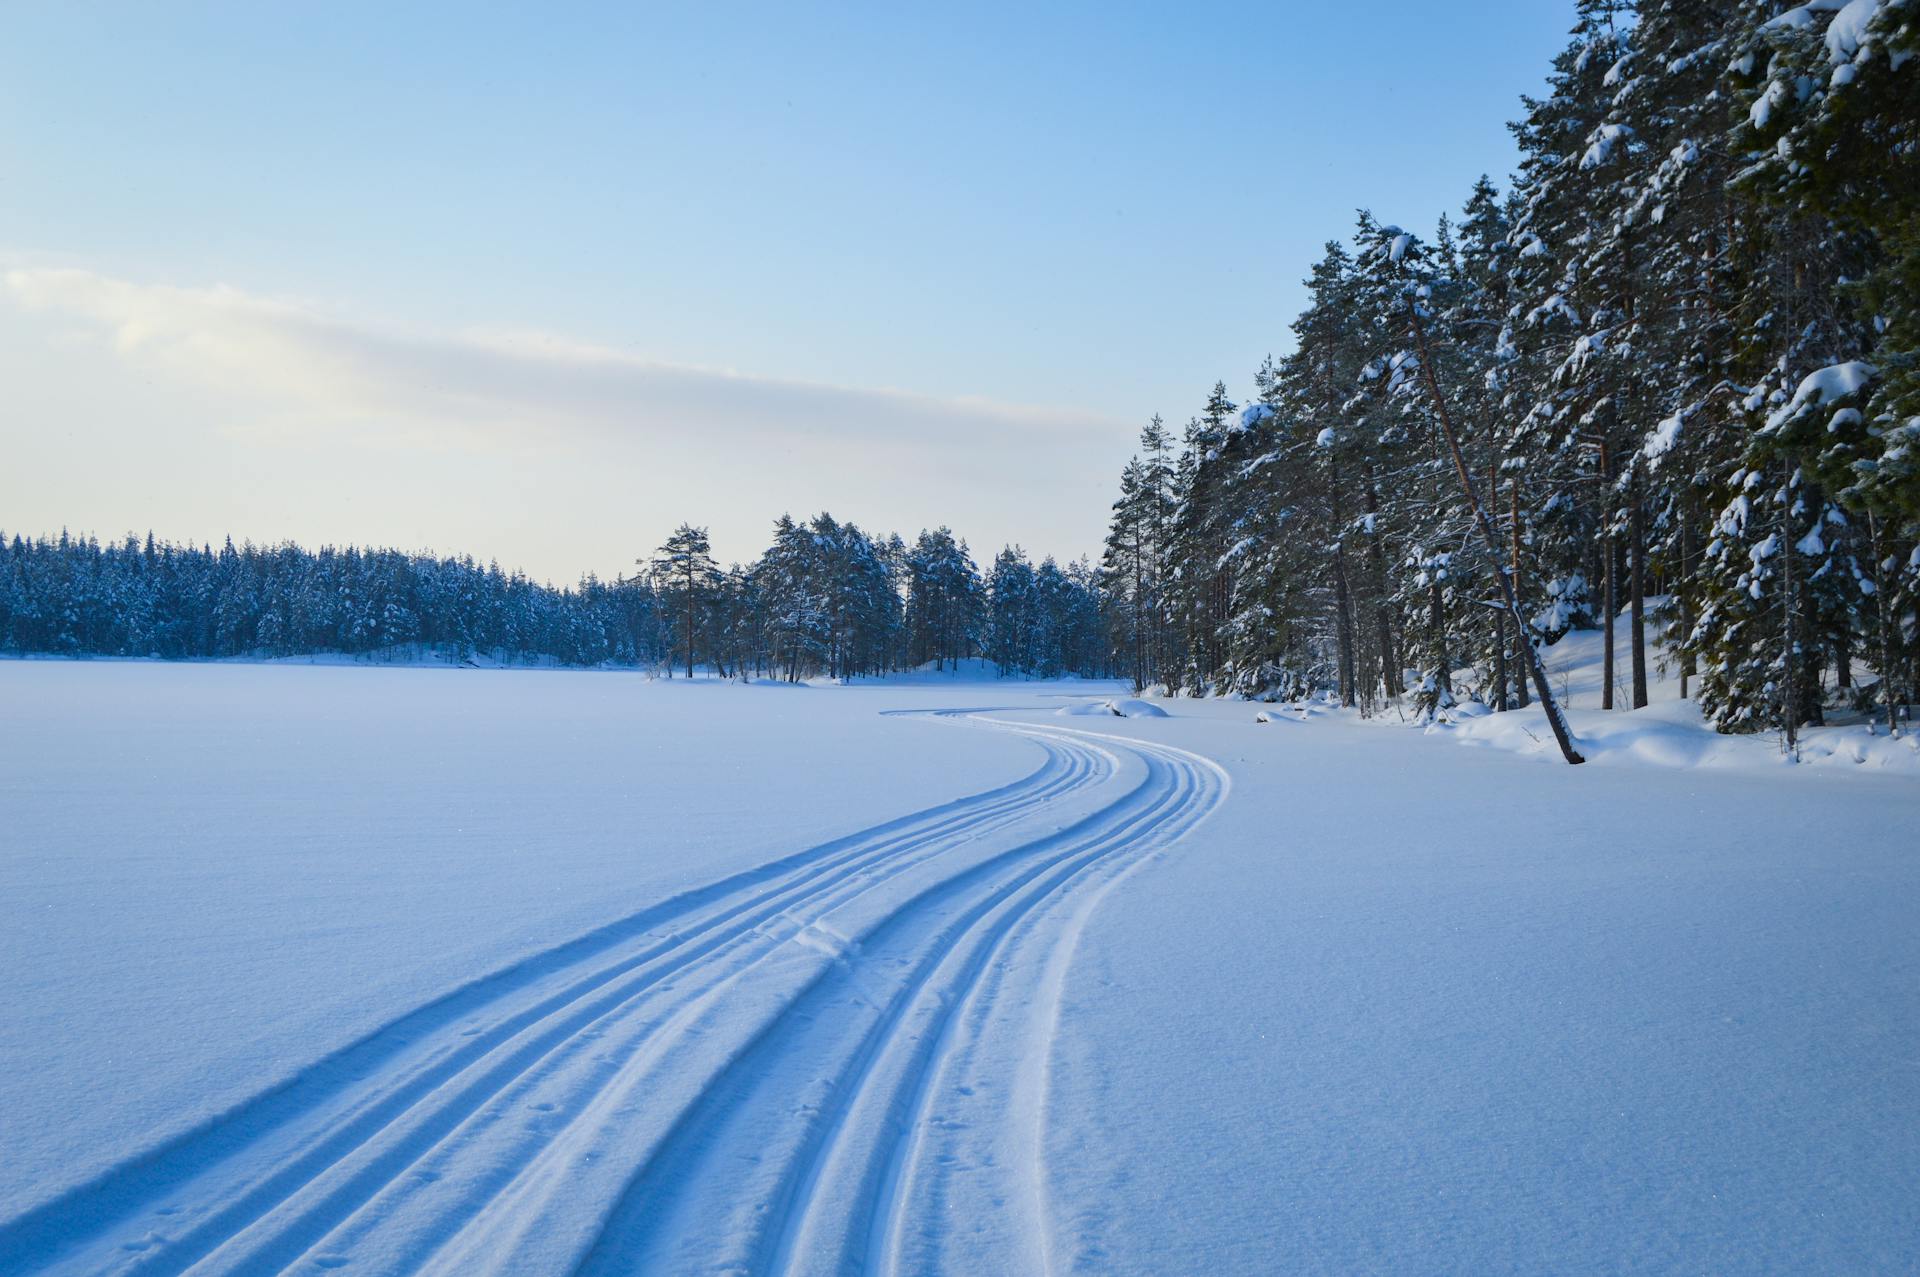 Long ski tracks wind through the winter landscape around a lake in the wilderness of Sweden.